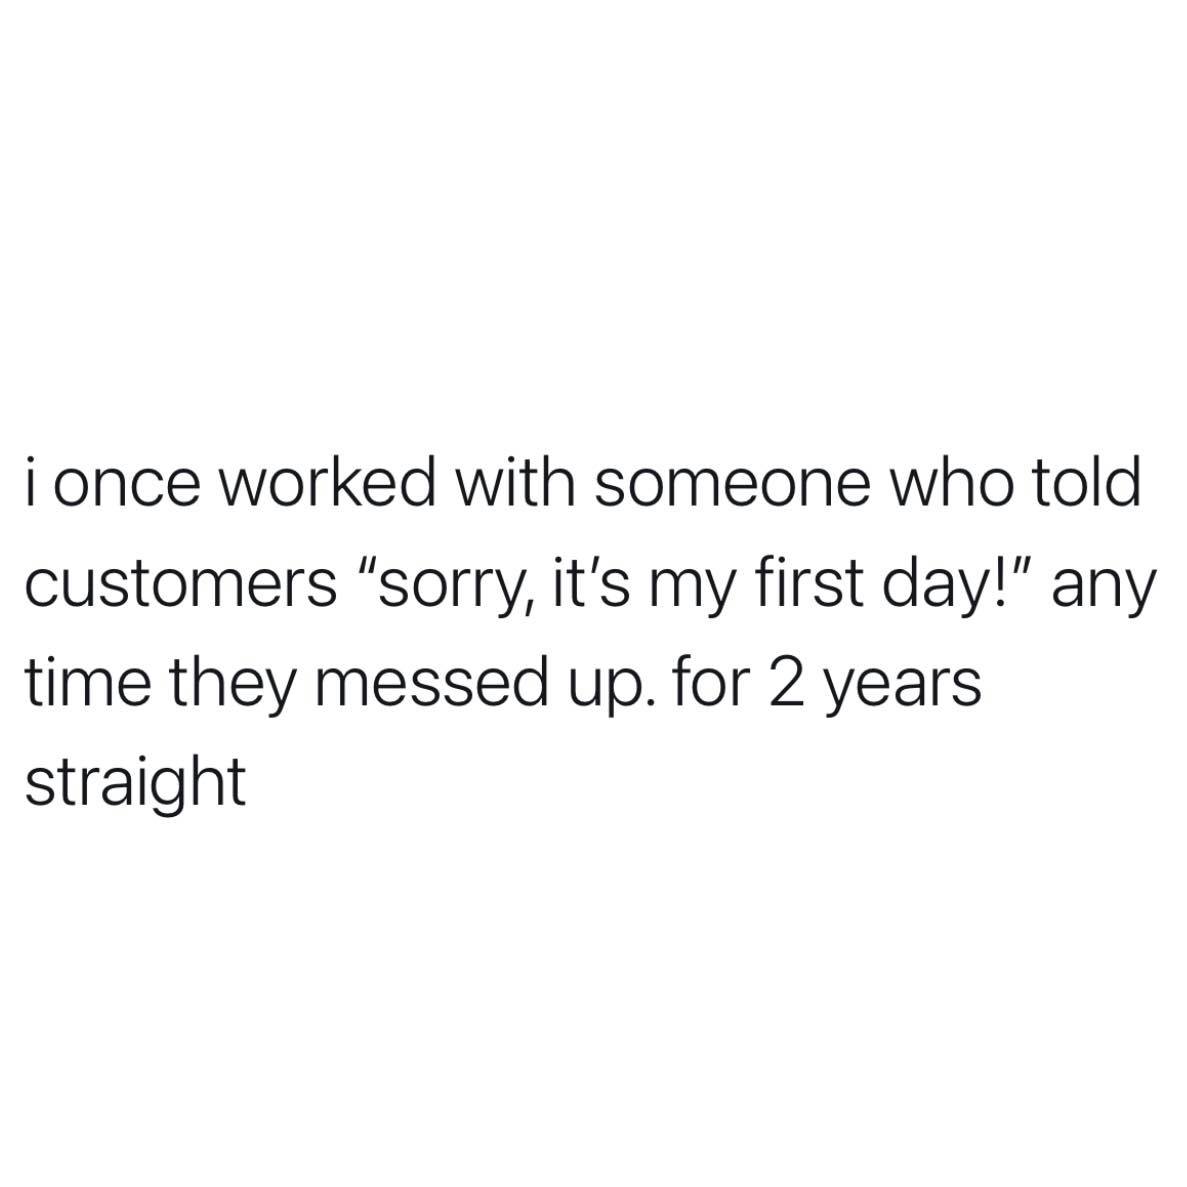 angle - i once worked with someone who told customers "sorry, it's my first day!" any time they messed up. for 2 years straight